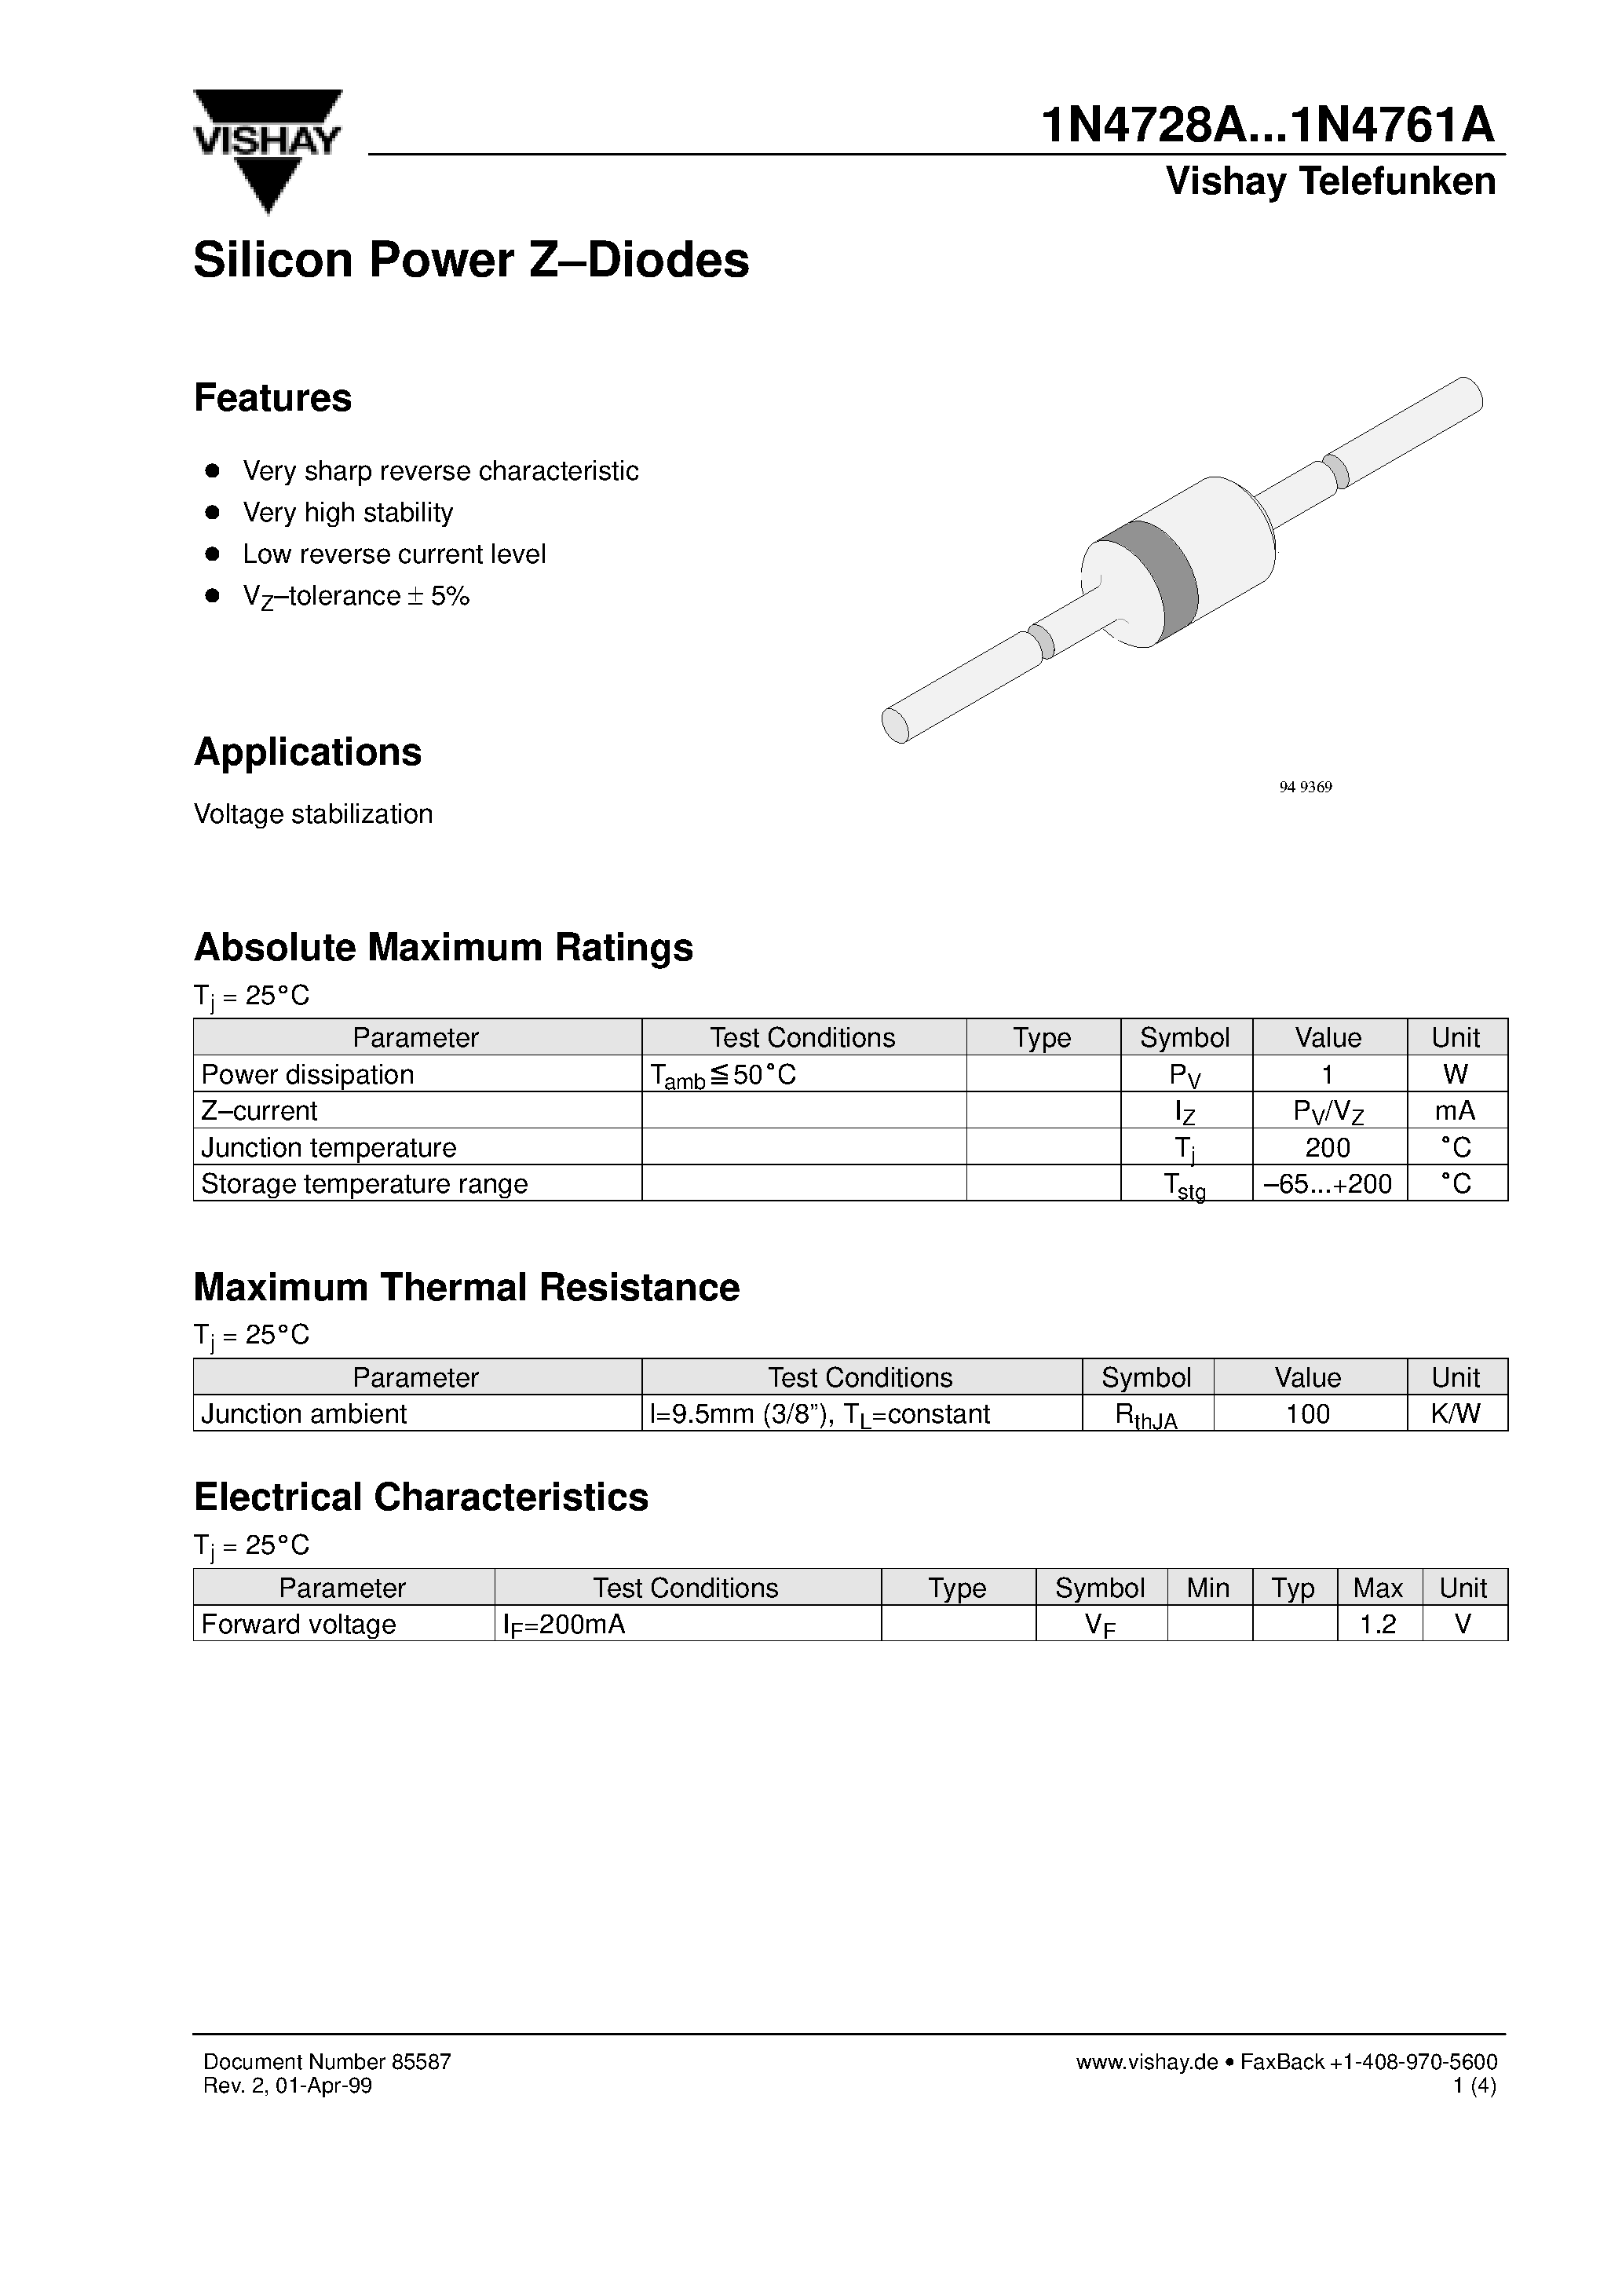 Даташит 1N4760A - Silicon Power Z-Diodes страница 1